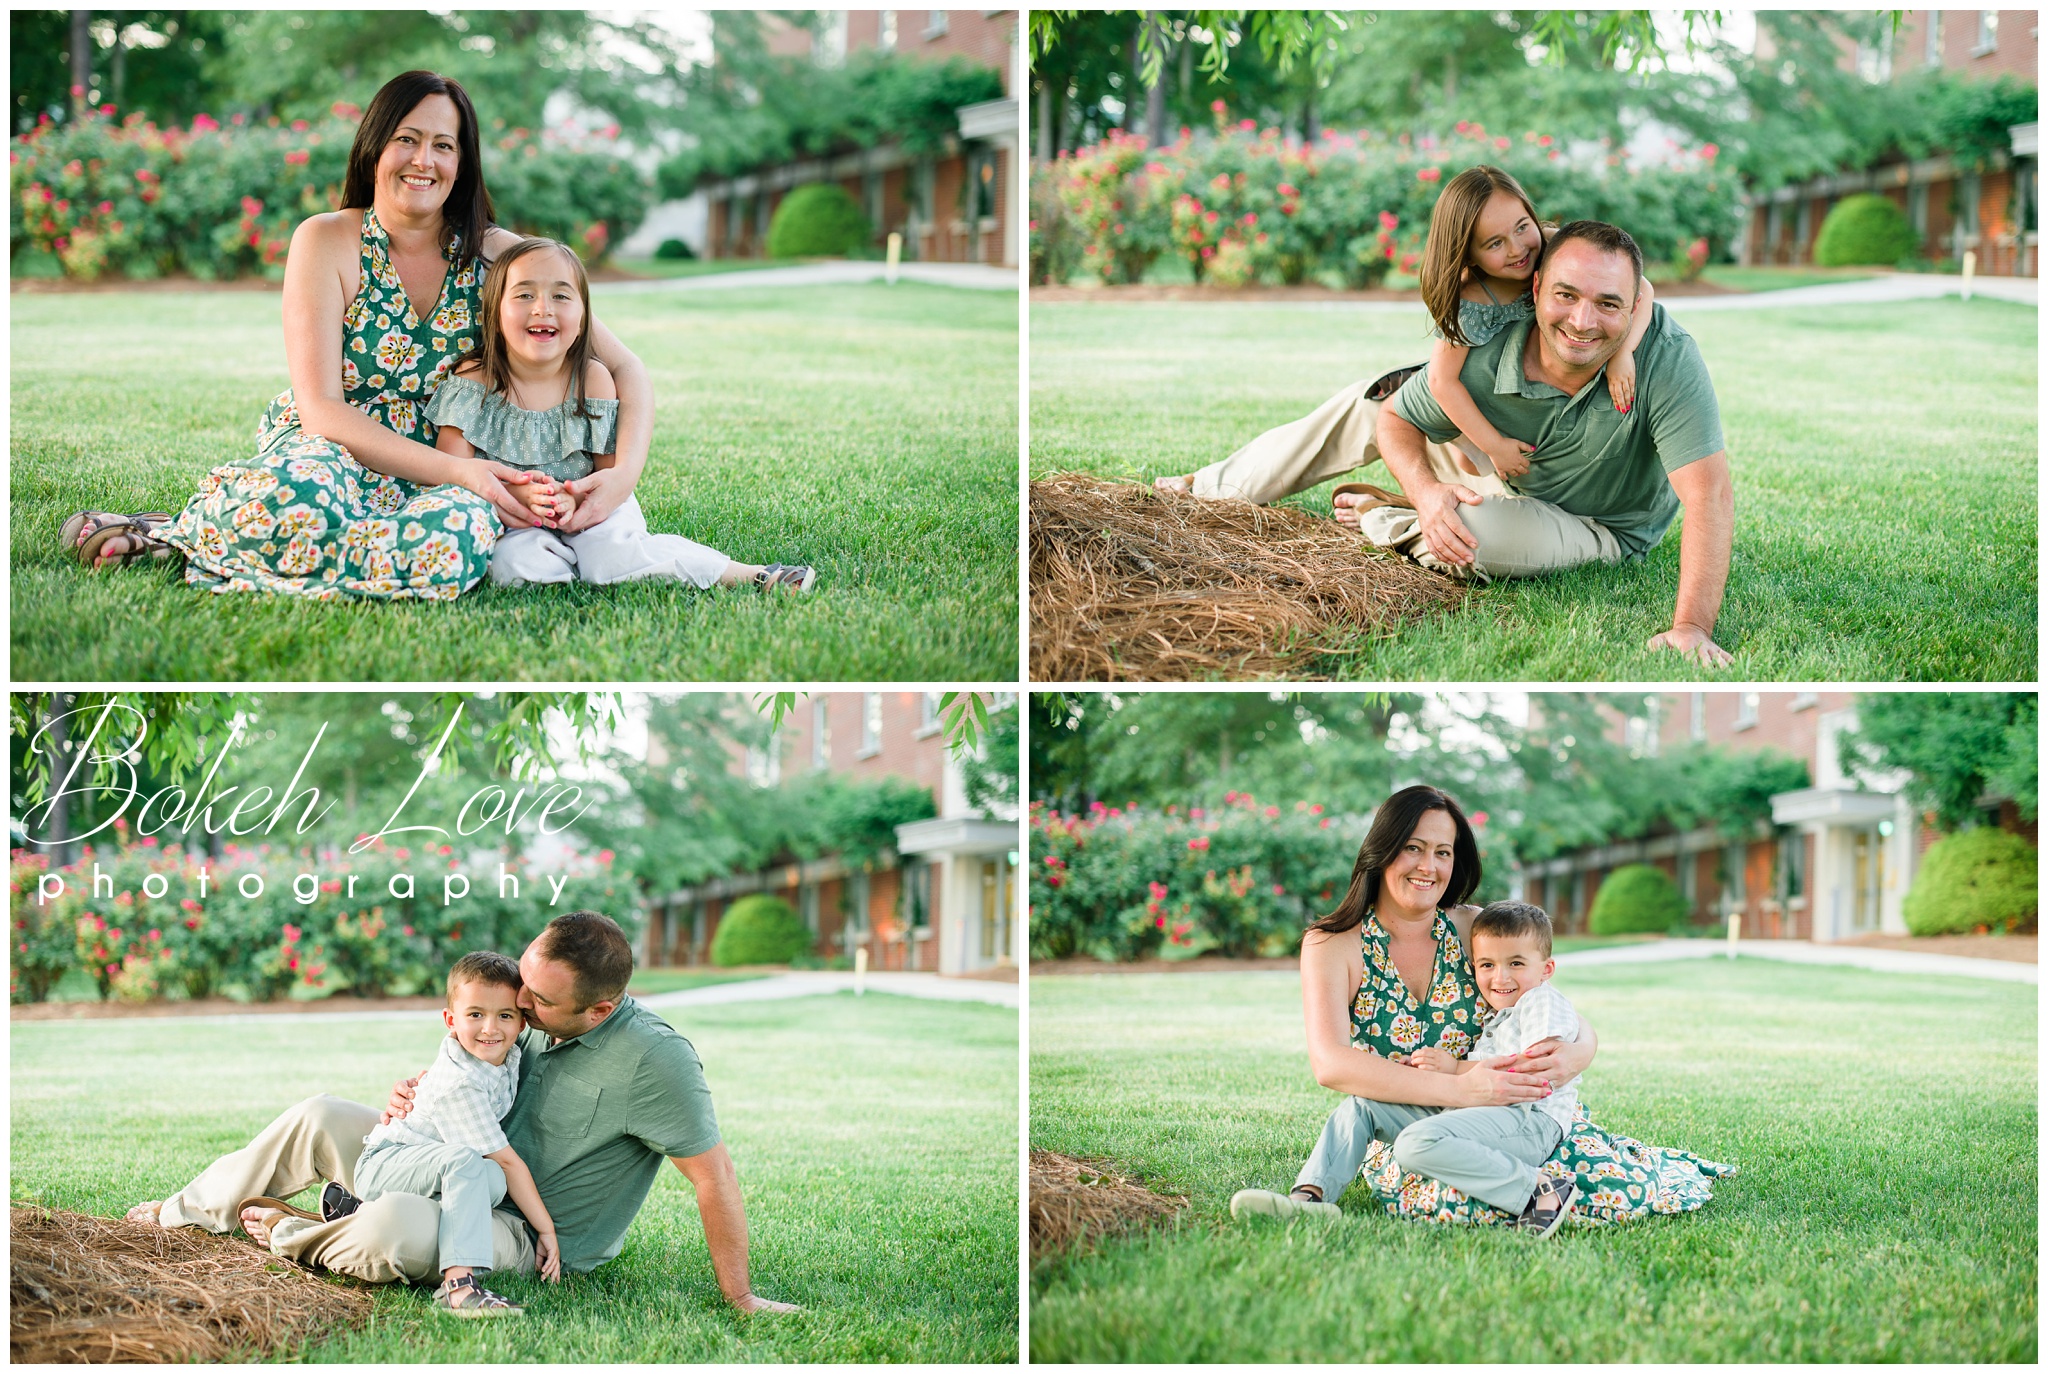 Summer Family Session in Galloway, NJ, Bokeh Love Photography, South Jersey Portrait Photographer, Stockton Unviersity, Galloway Portrait Photographer, Absecon Portrait Photographer, NJ Portrait Photographer